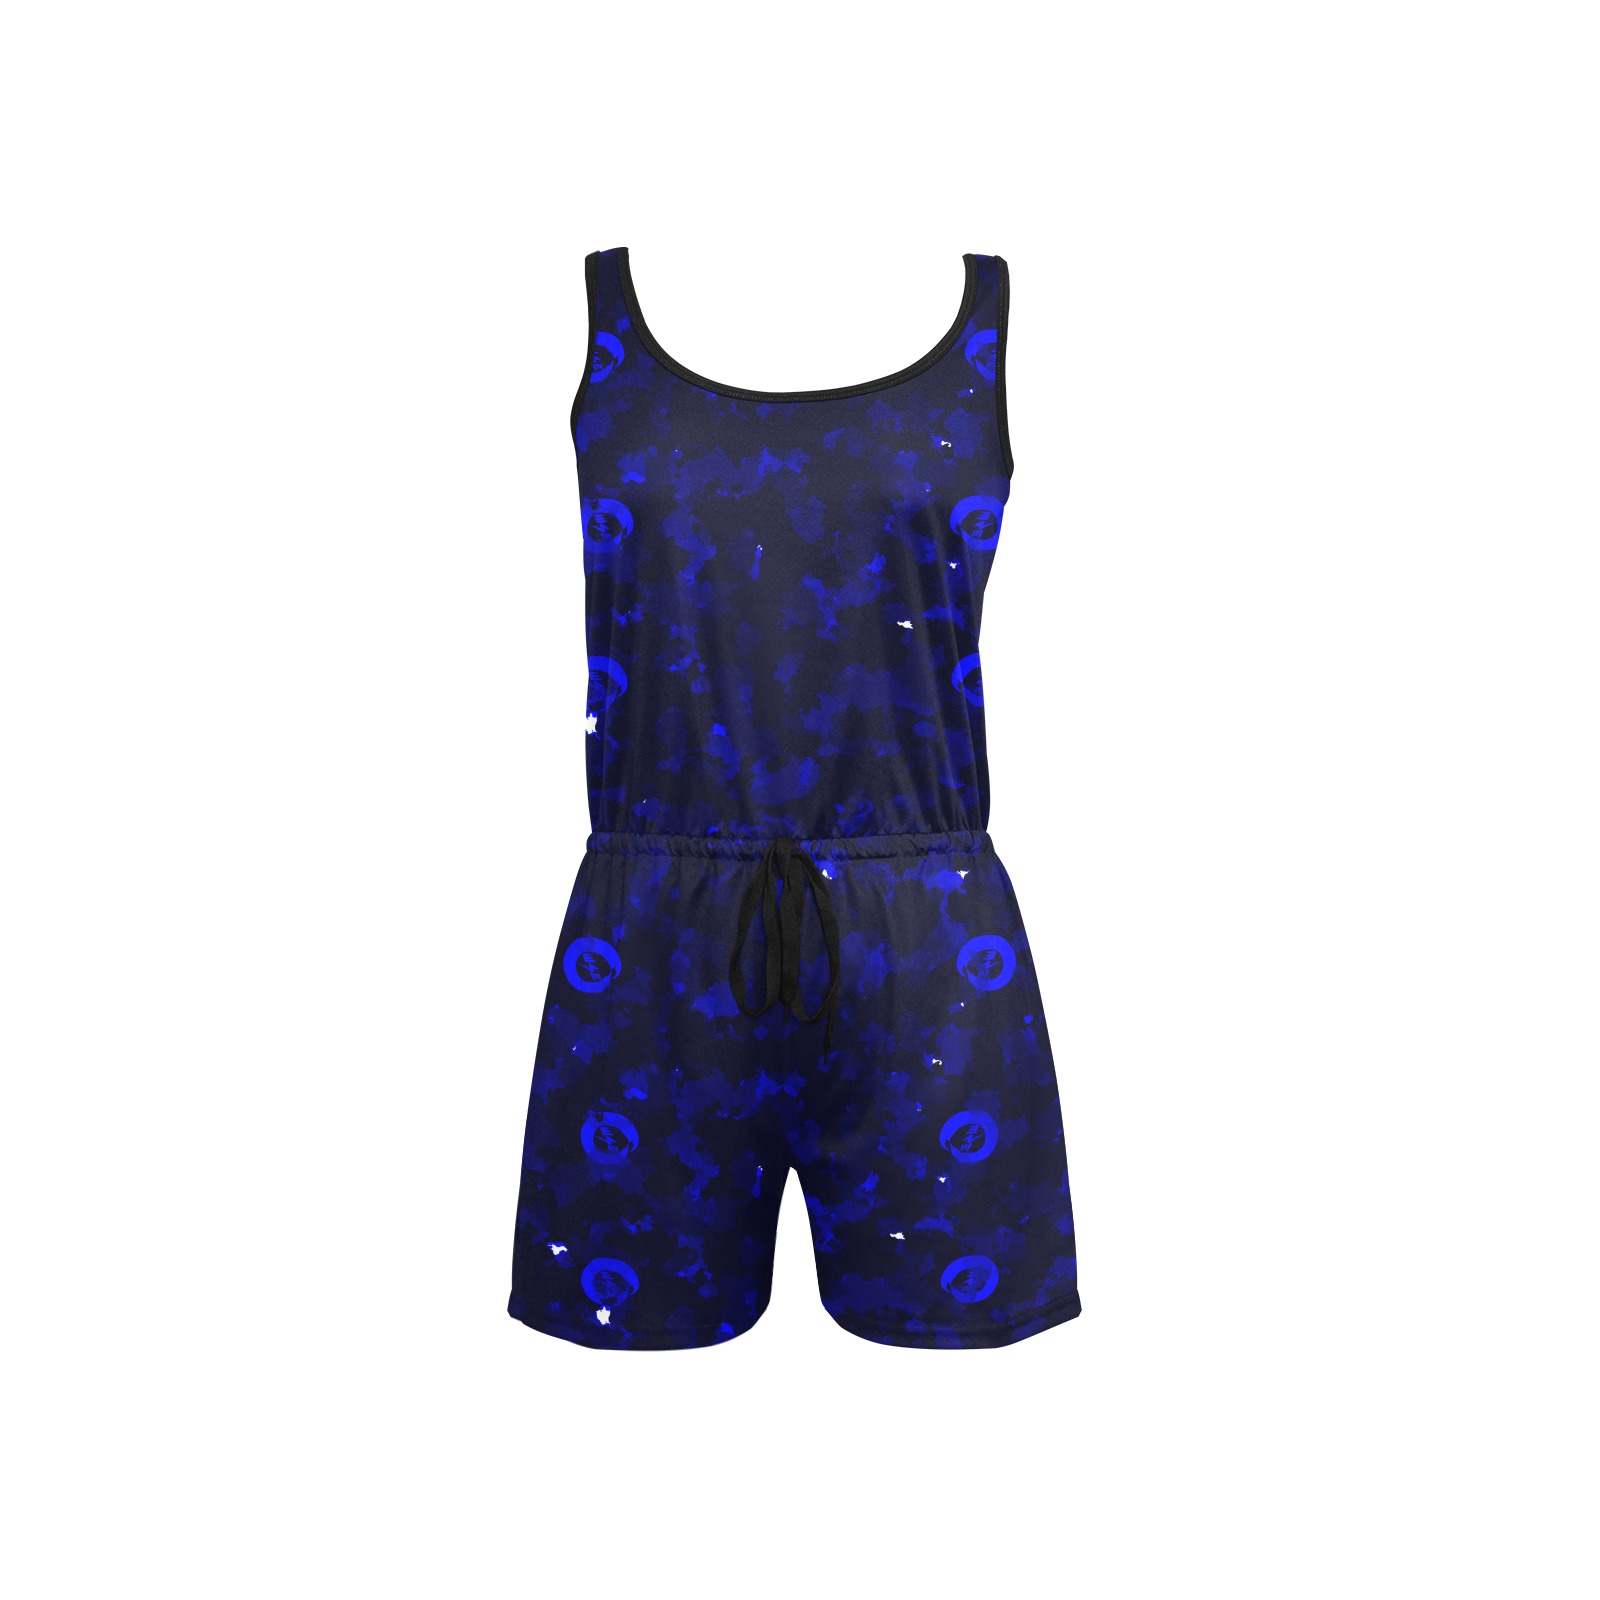 New Project (10) All Over Print Short Jumpsuit